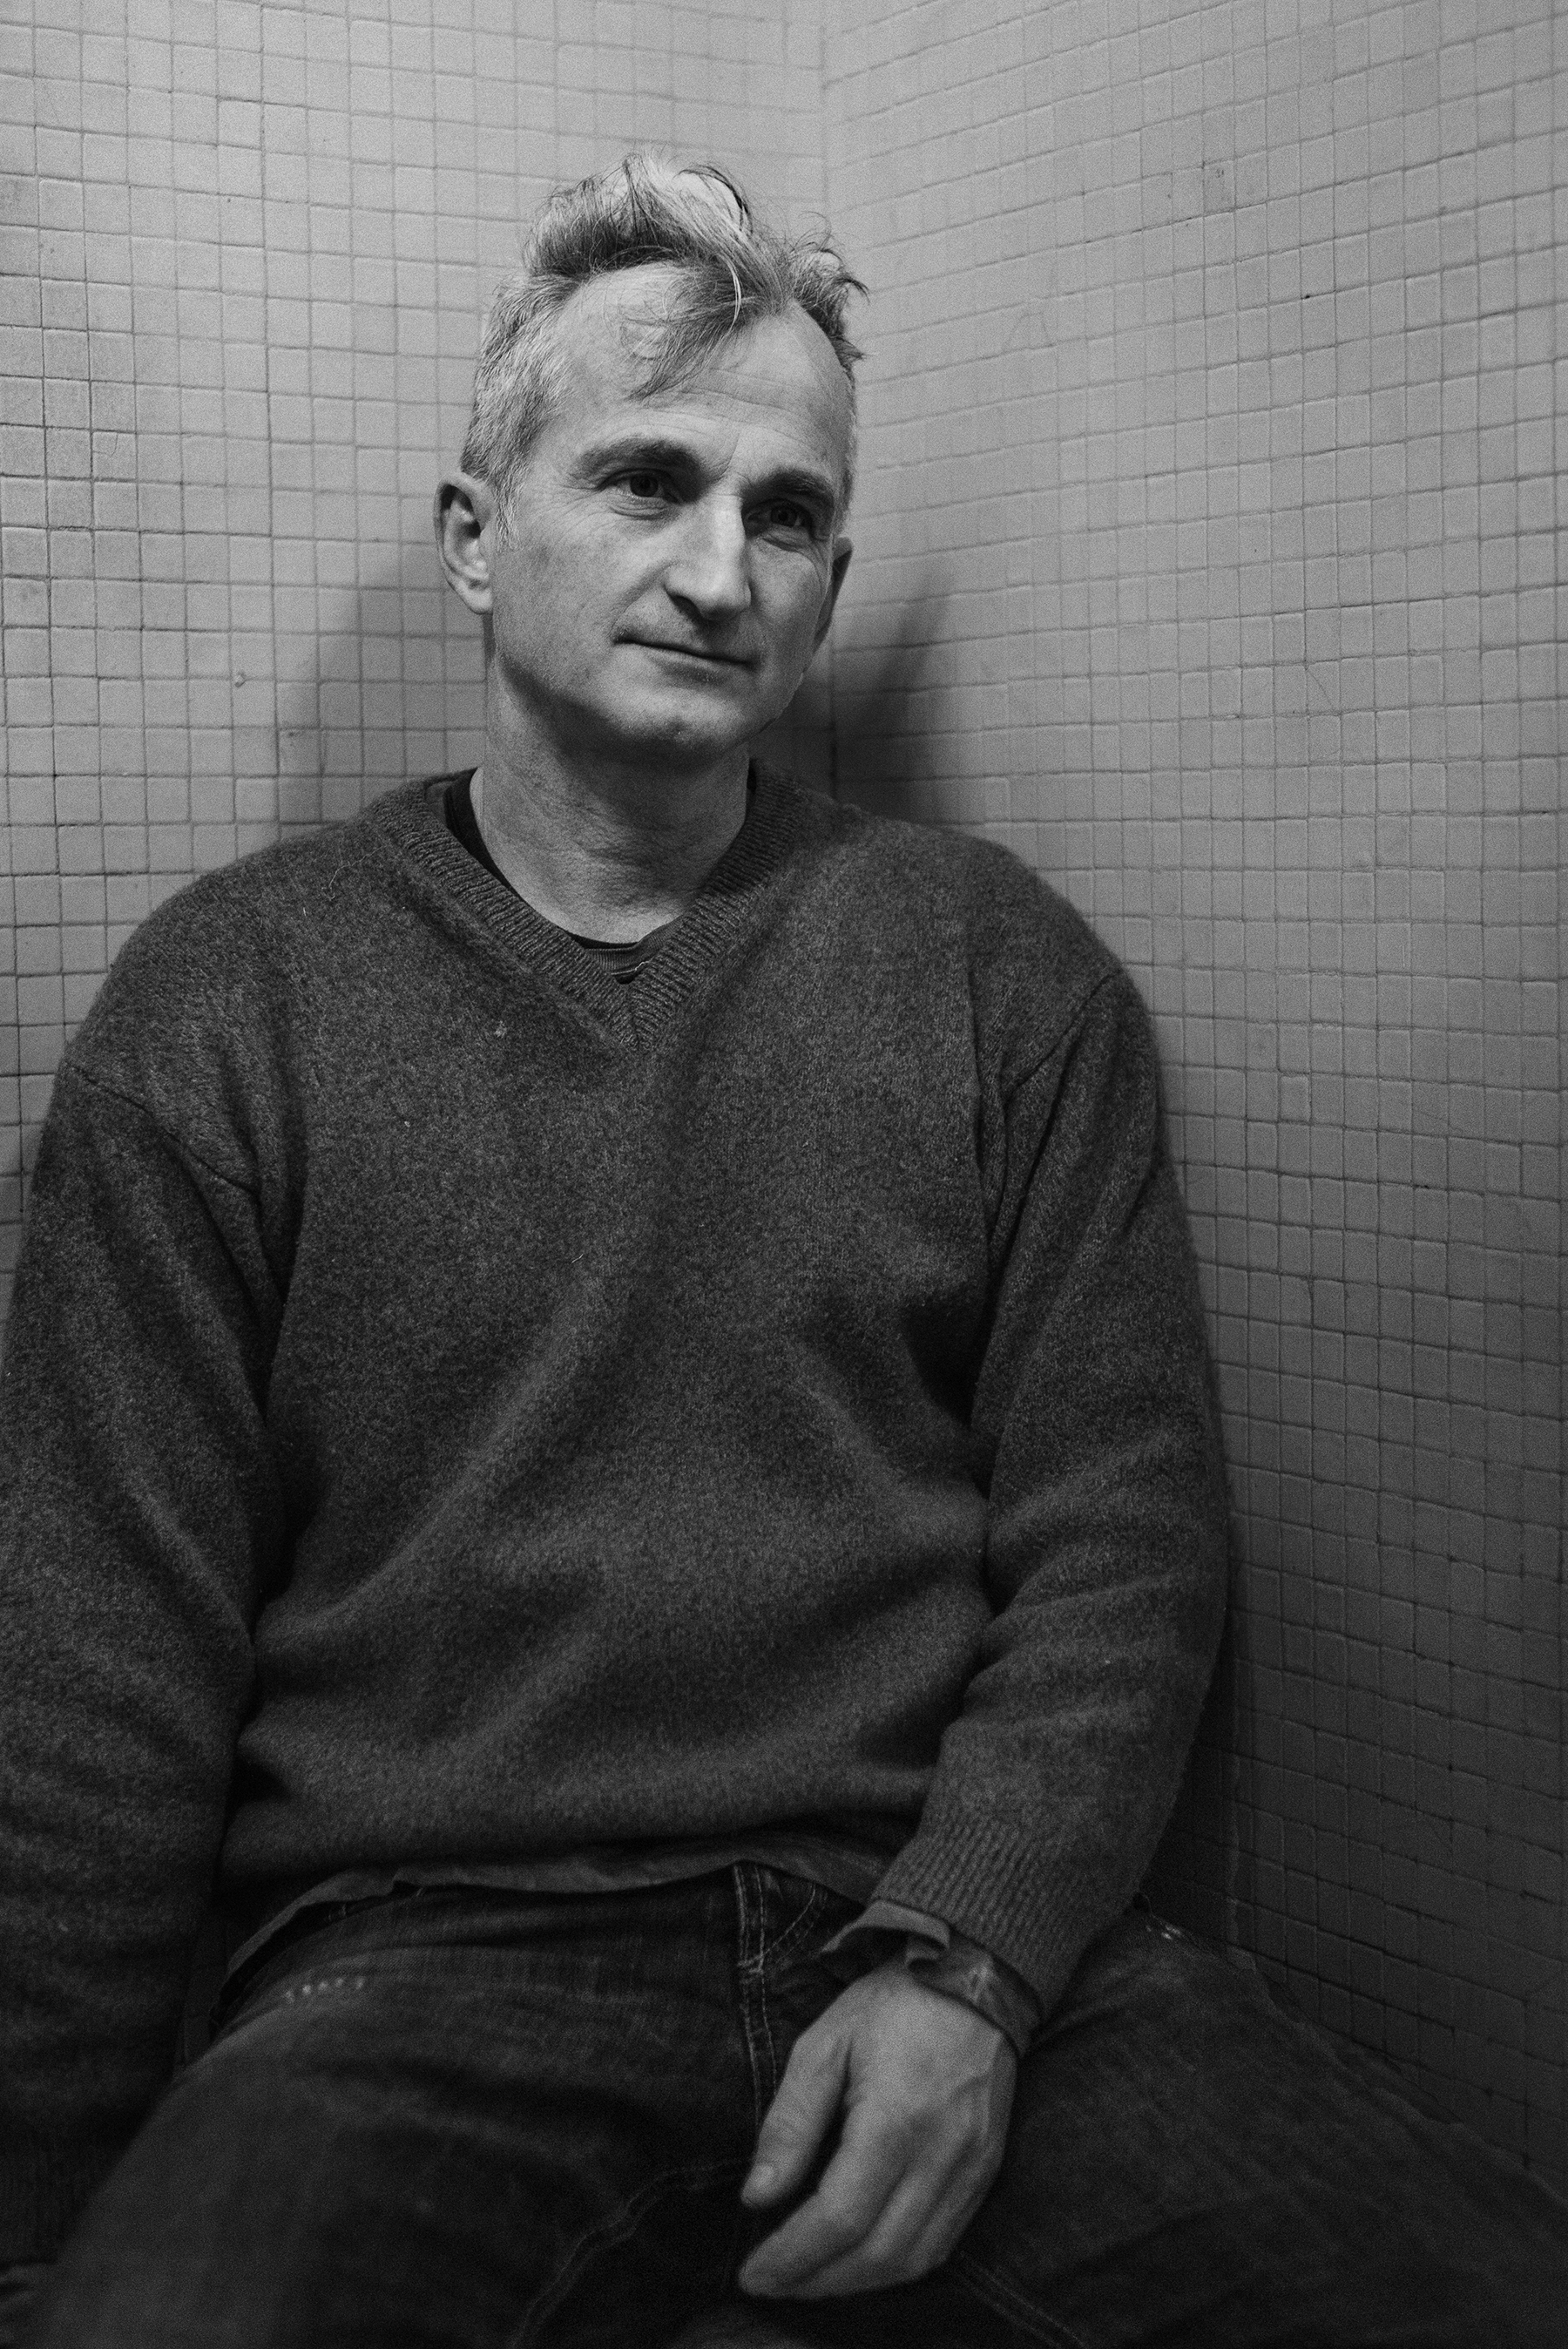  Andrea Rosso (45) portrayed inside the Public Baths of Via Agli� in the working-class district of Barriera di Milano in Turin, Italy; November 2018.
Mr. Rosso separated from his ex-wife in July; since he couldn�t afford a space for himself, he is no